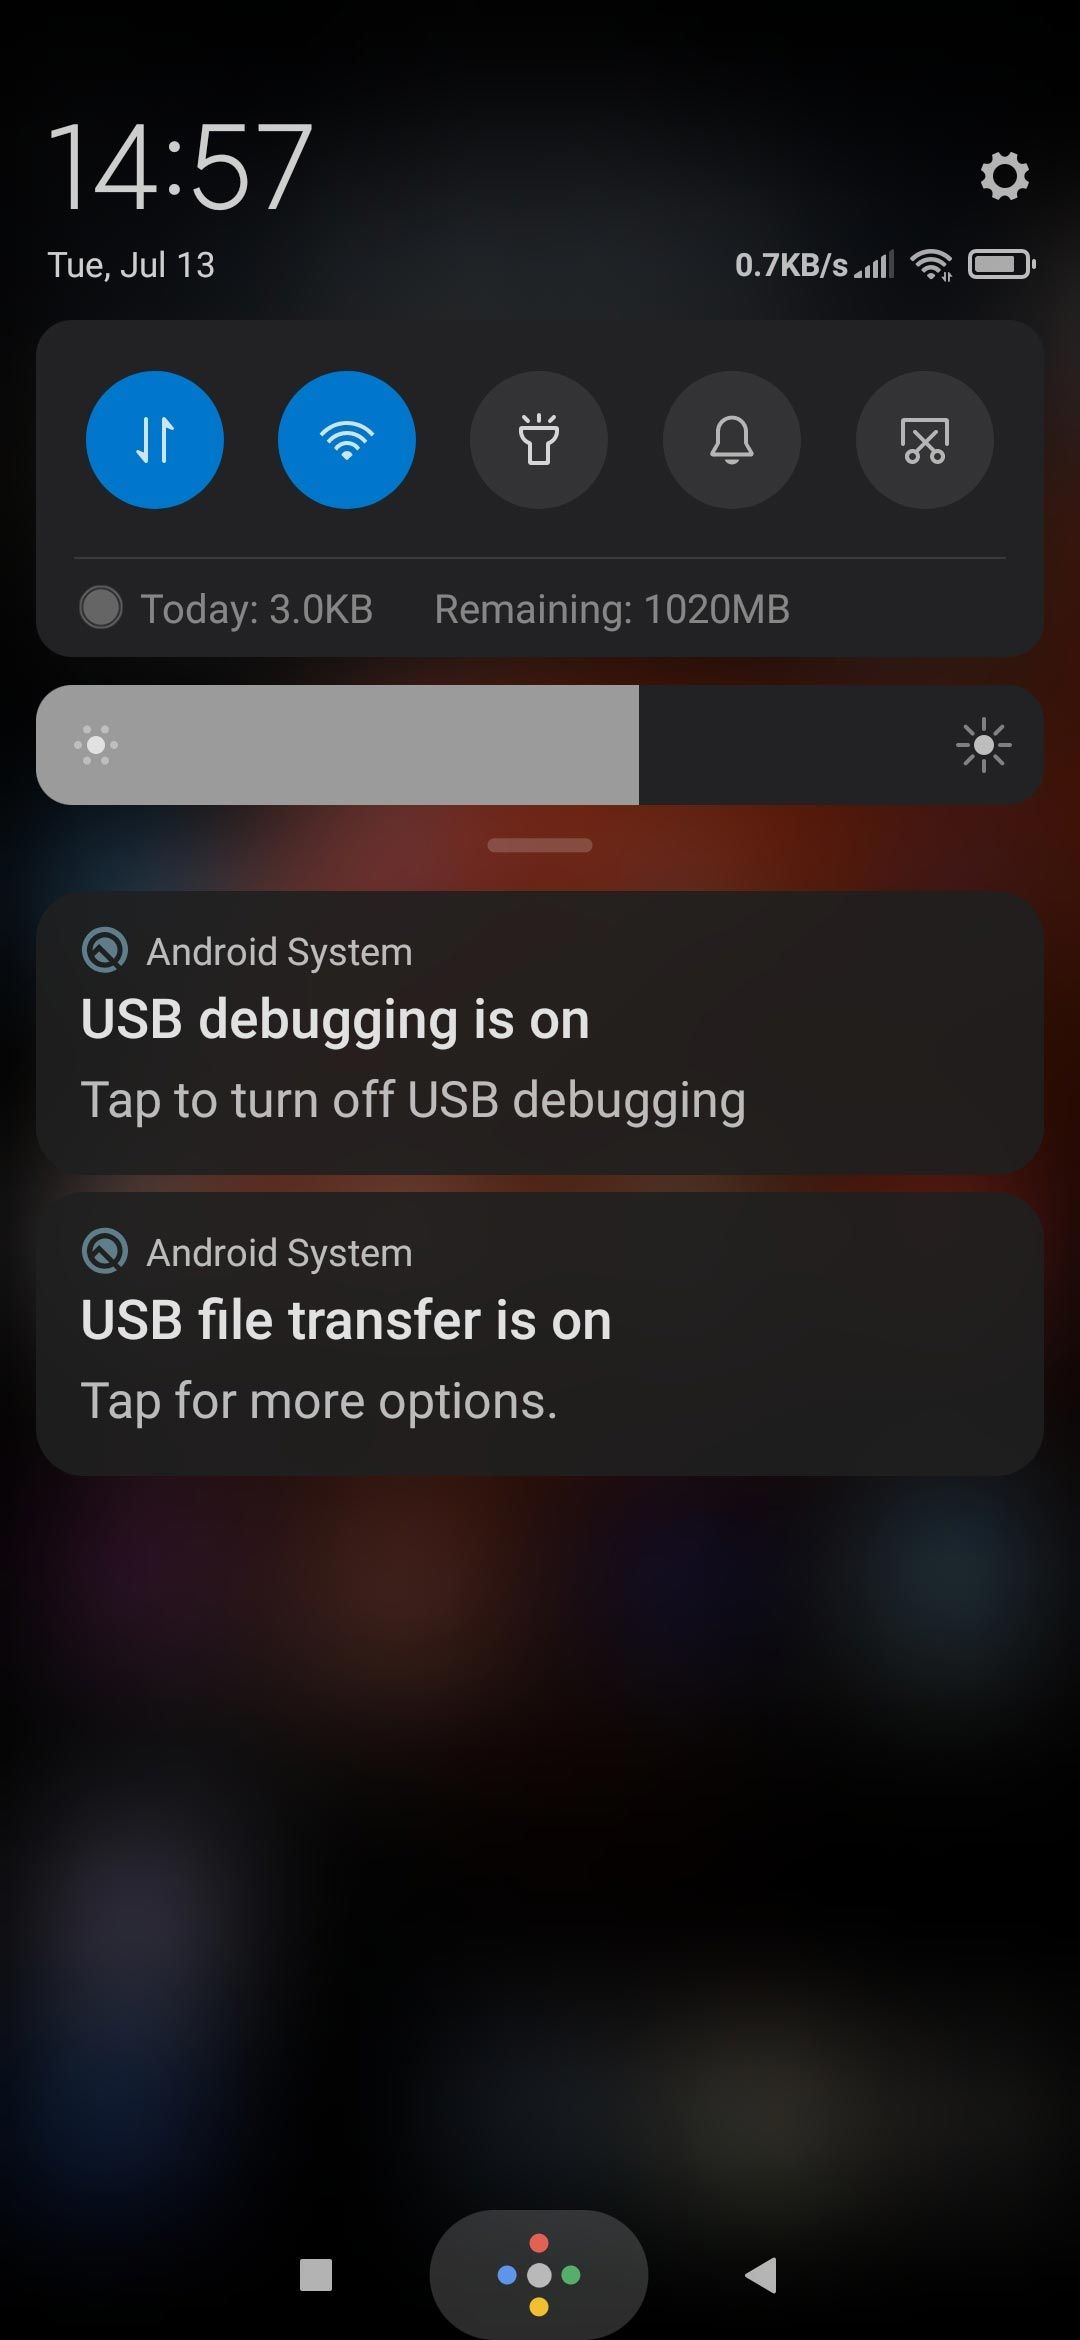 Android System notification showing USB debugging is on